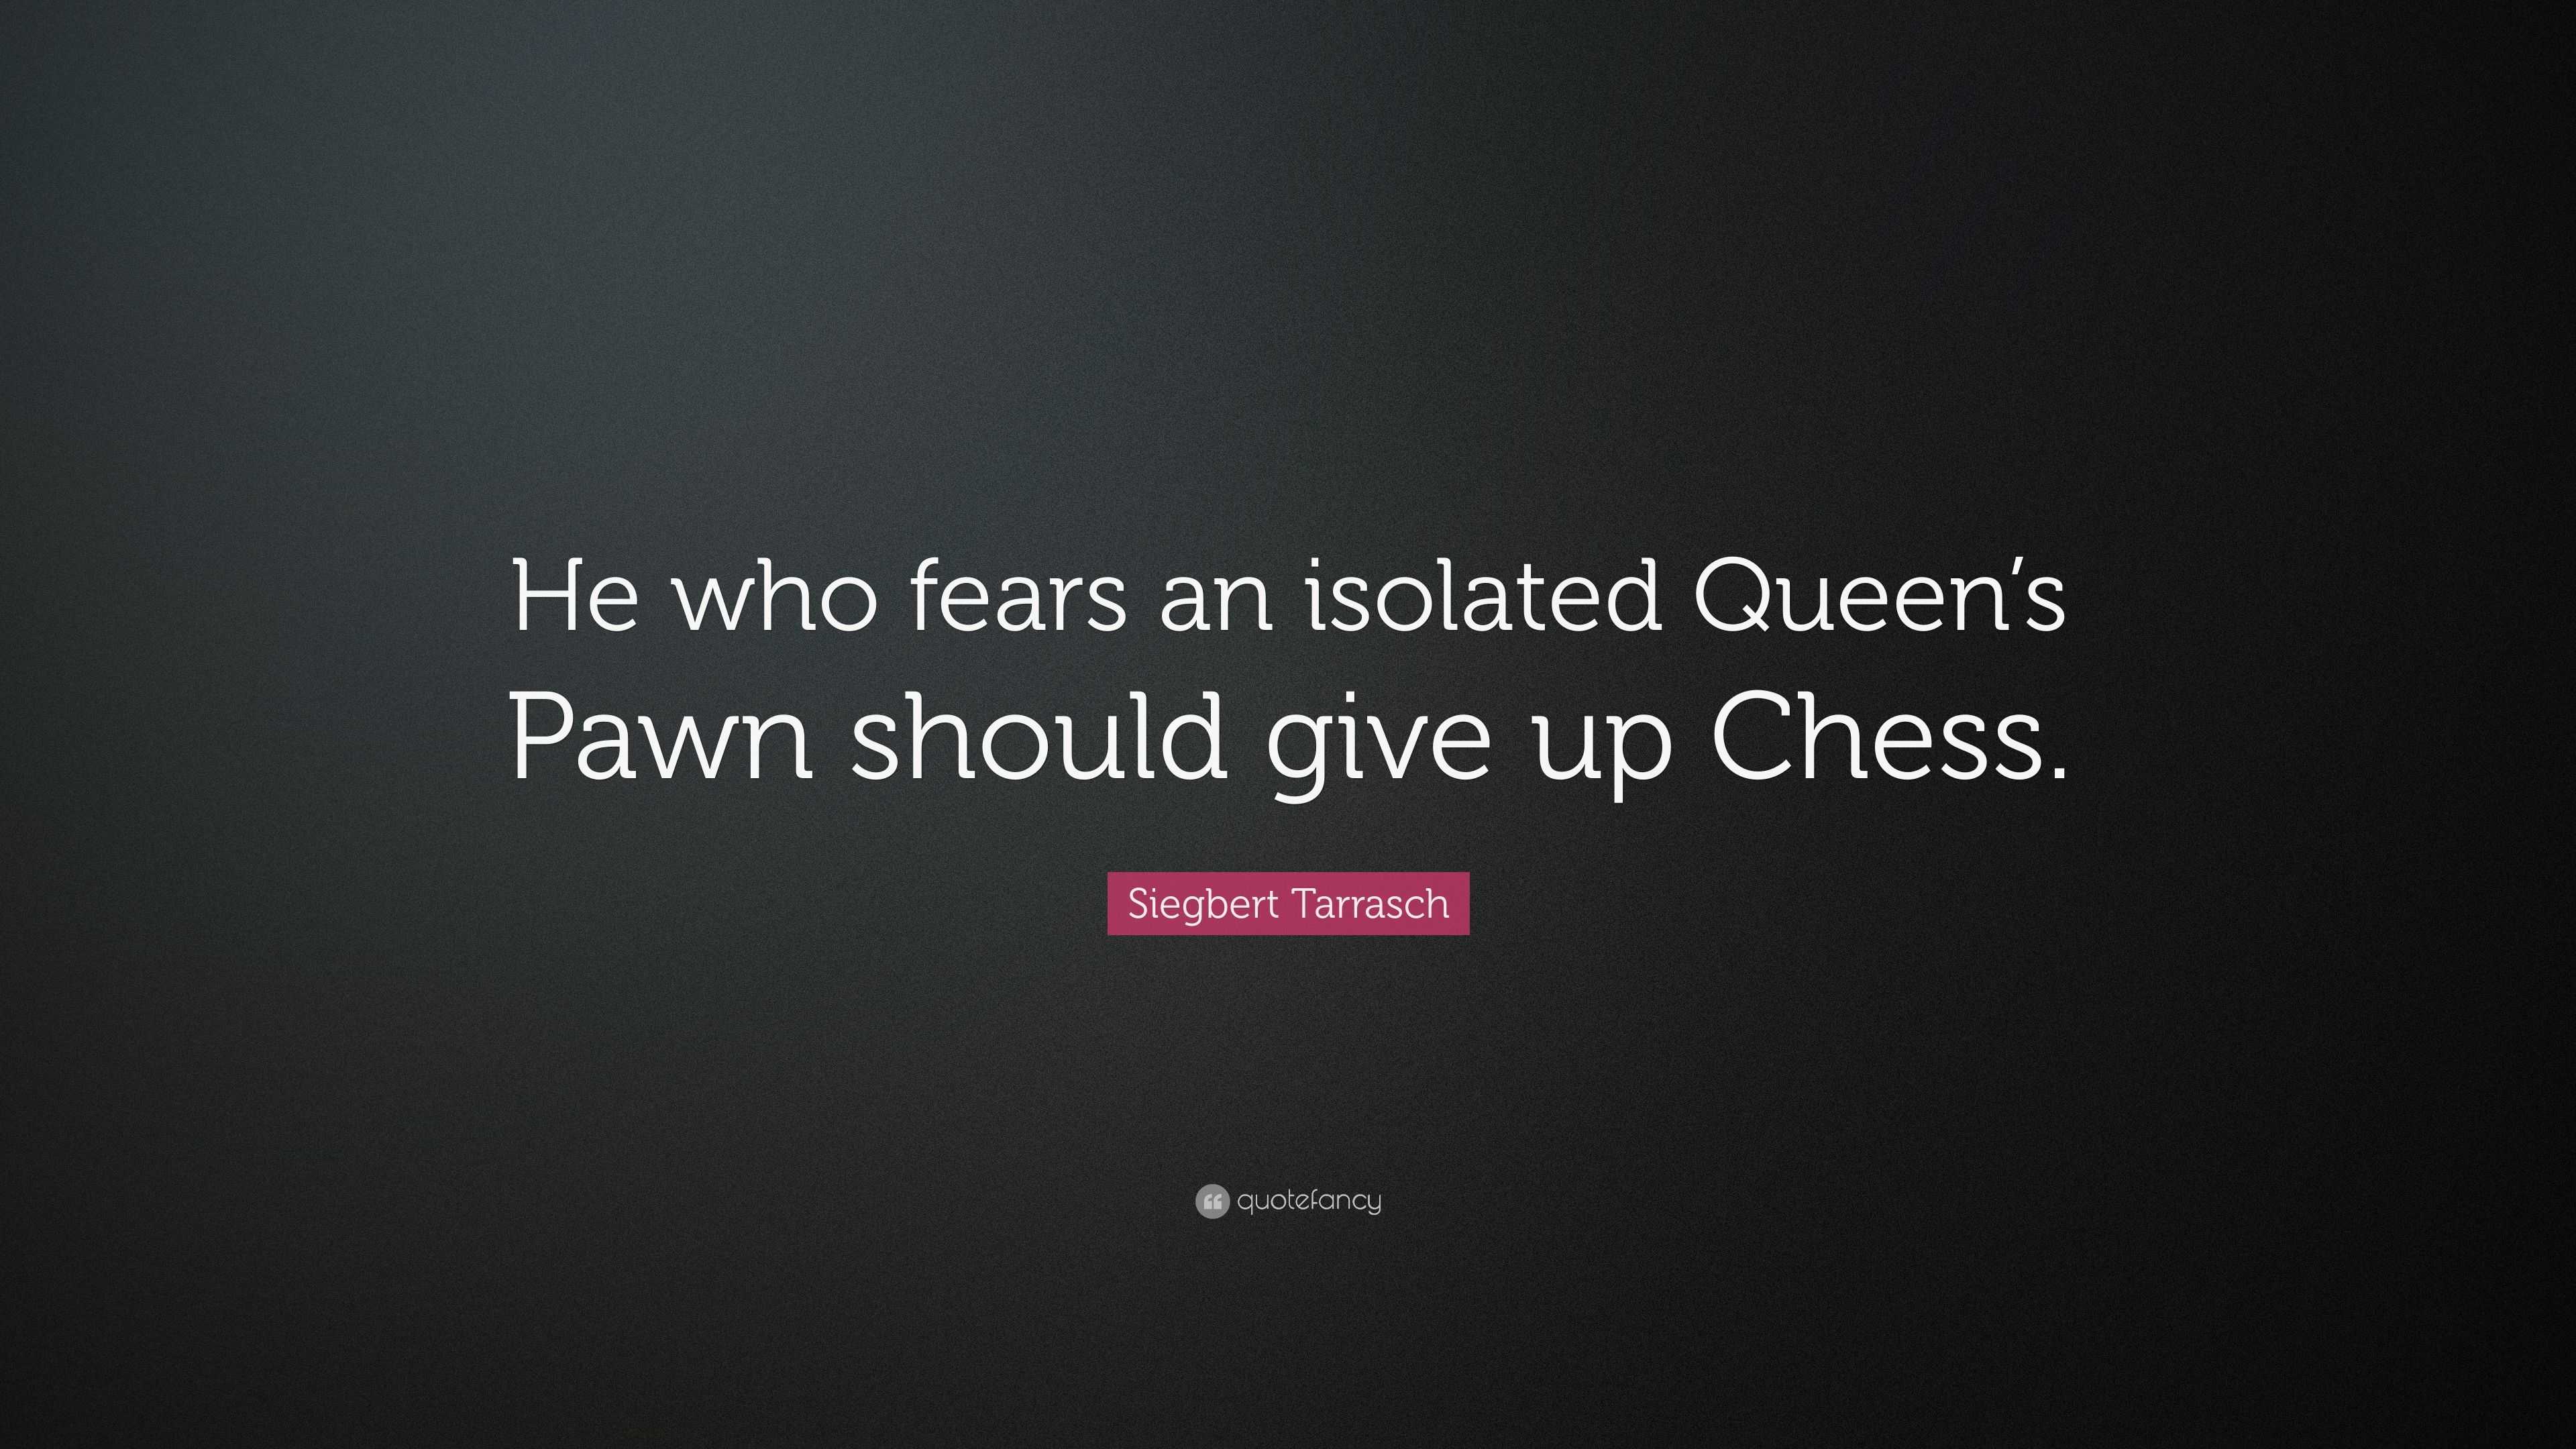 Genuinely confused. Why would promoting to a Queen instead of a Rook be  seen as an inaccuracy here? : r/chessbeginners